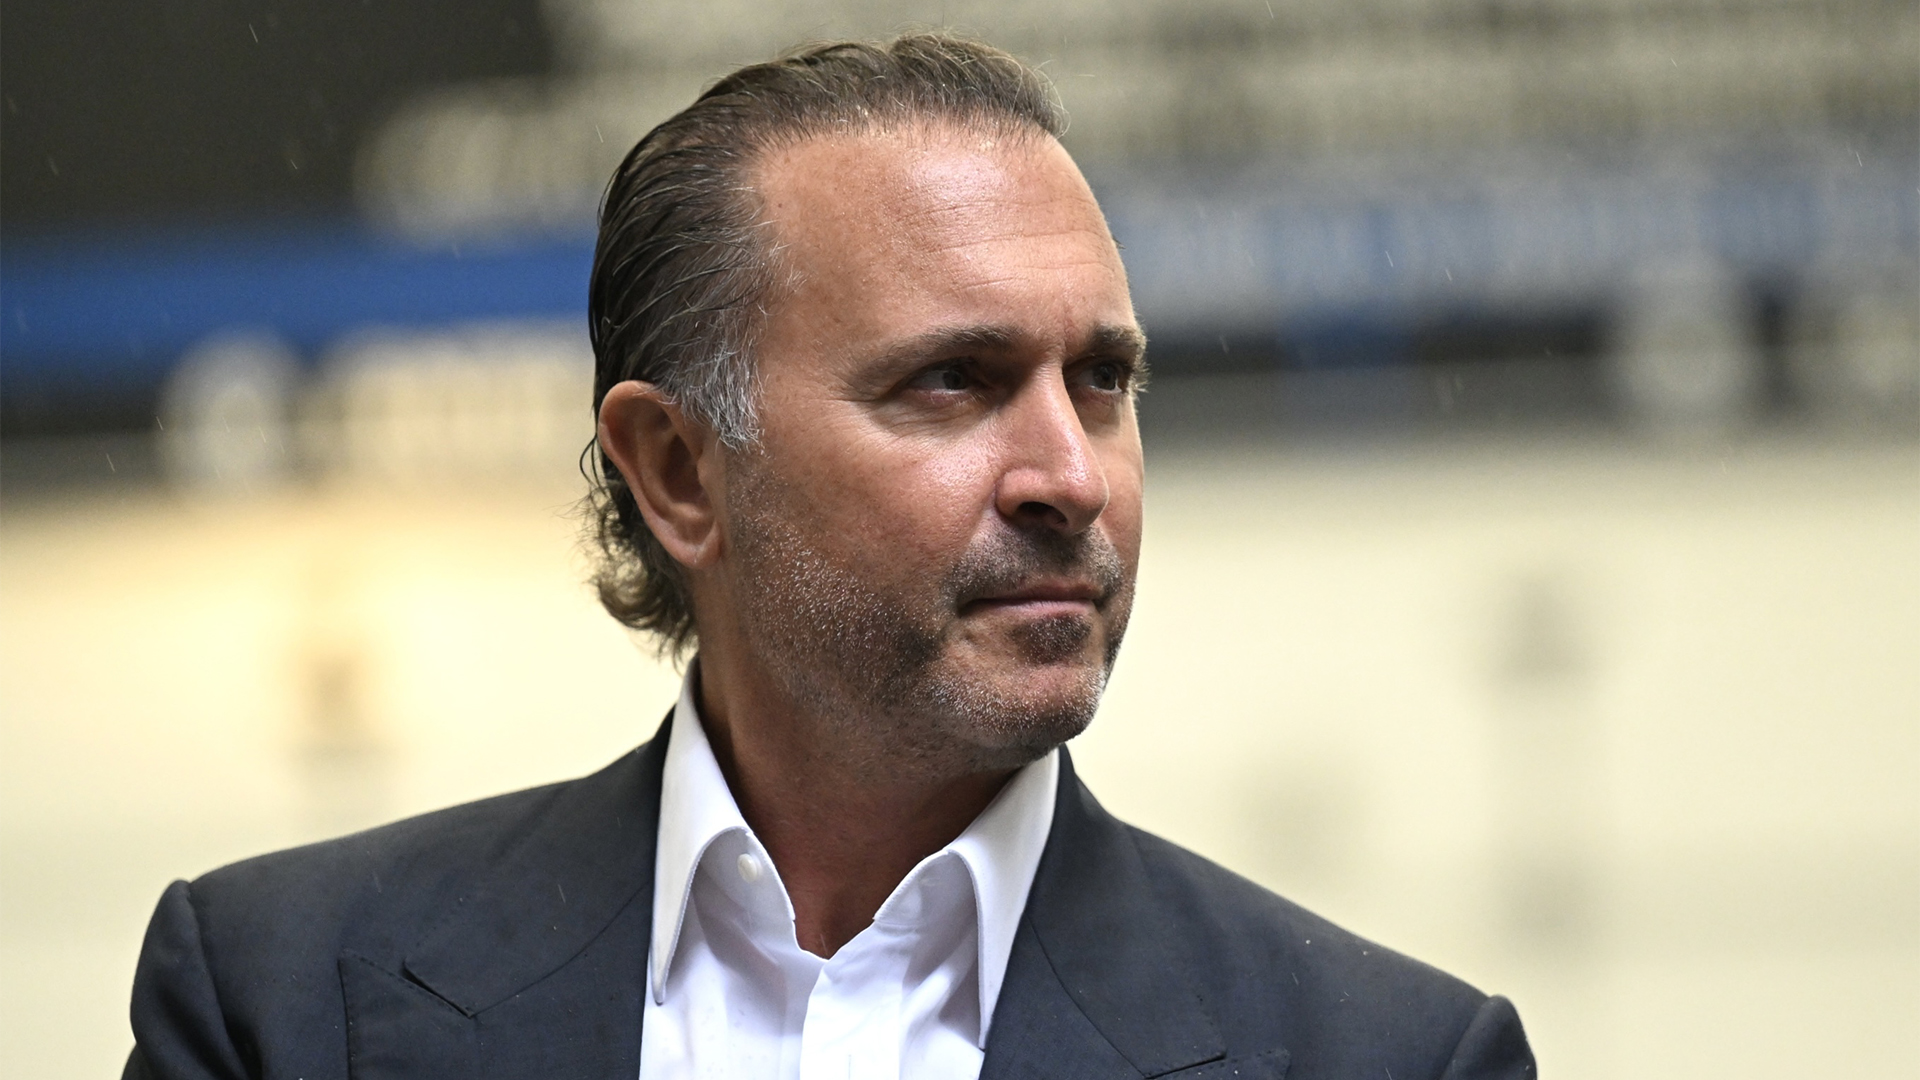 Milan owner Gerry Cardinale has promised changes at every level of the club. Stefano Pioli is highly at risk, but the overhaul could go well beyond that.